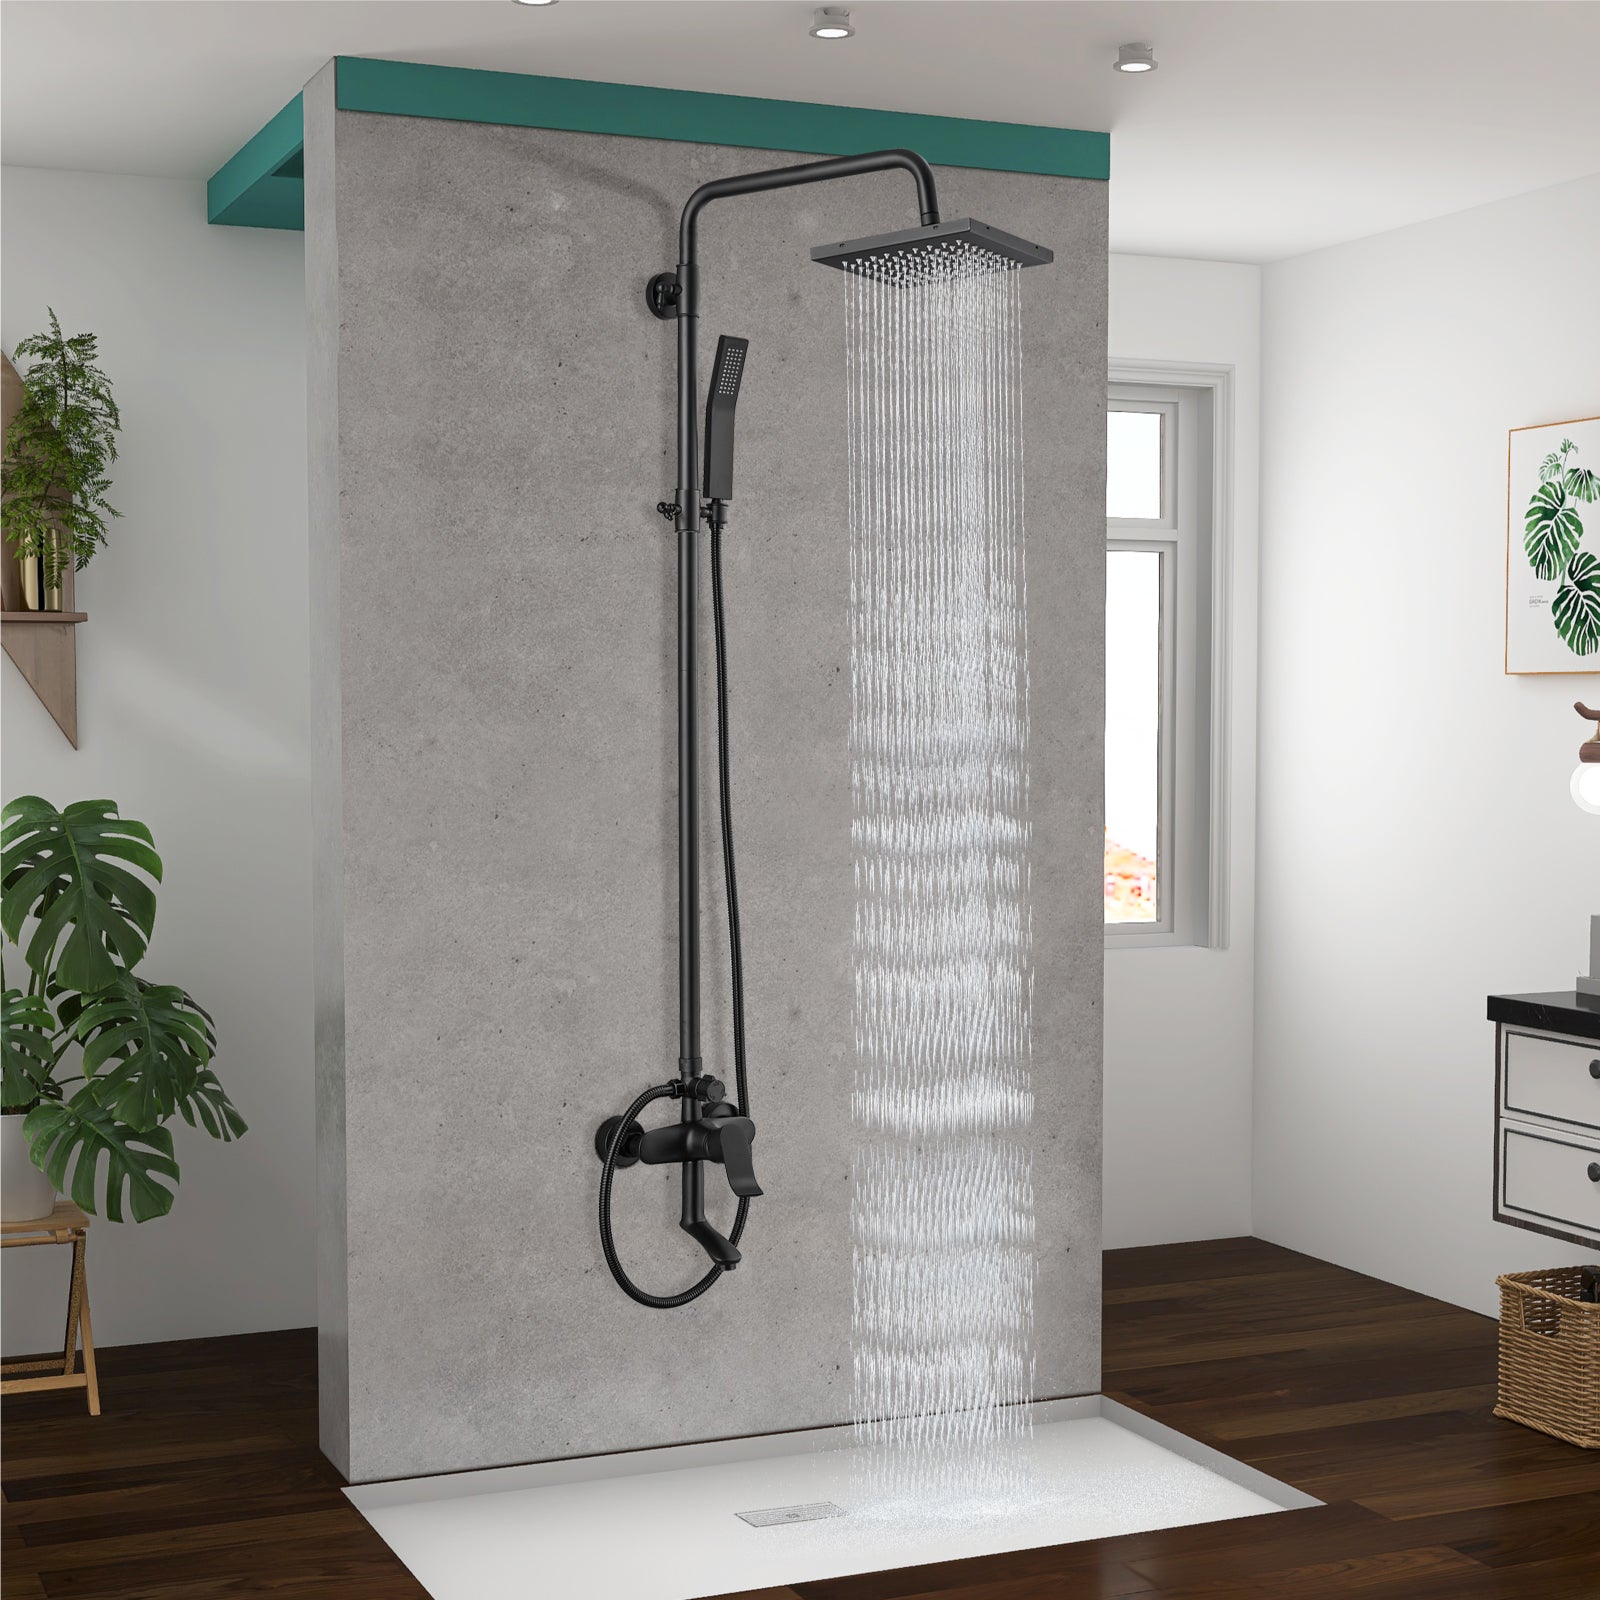 Exposed Shower System 3 Functional Bathroom Shower Faucet Set 8 Inch Square Rainfall Shower Head Wall Mounted Exposed Chrome Shower Faucet Set 8 Rain Exposed Pipe Shower